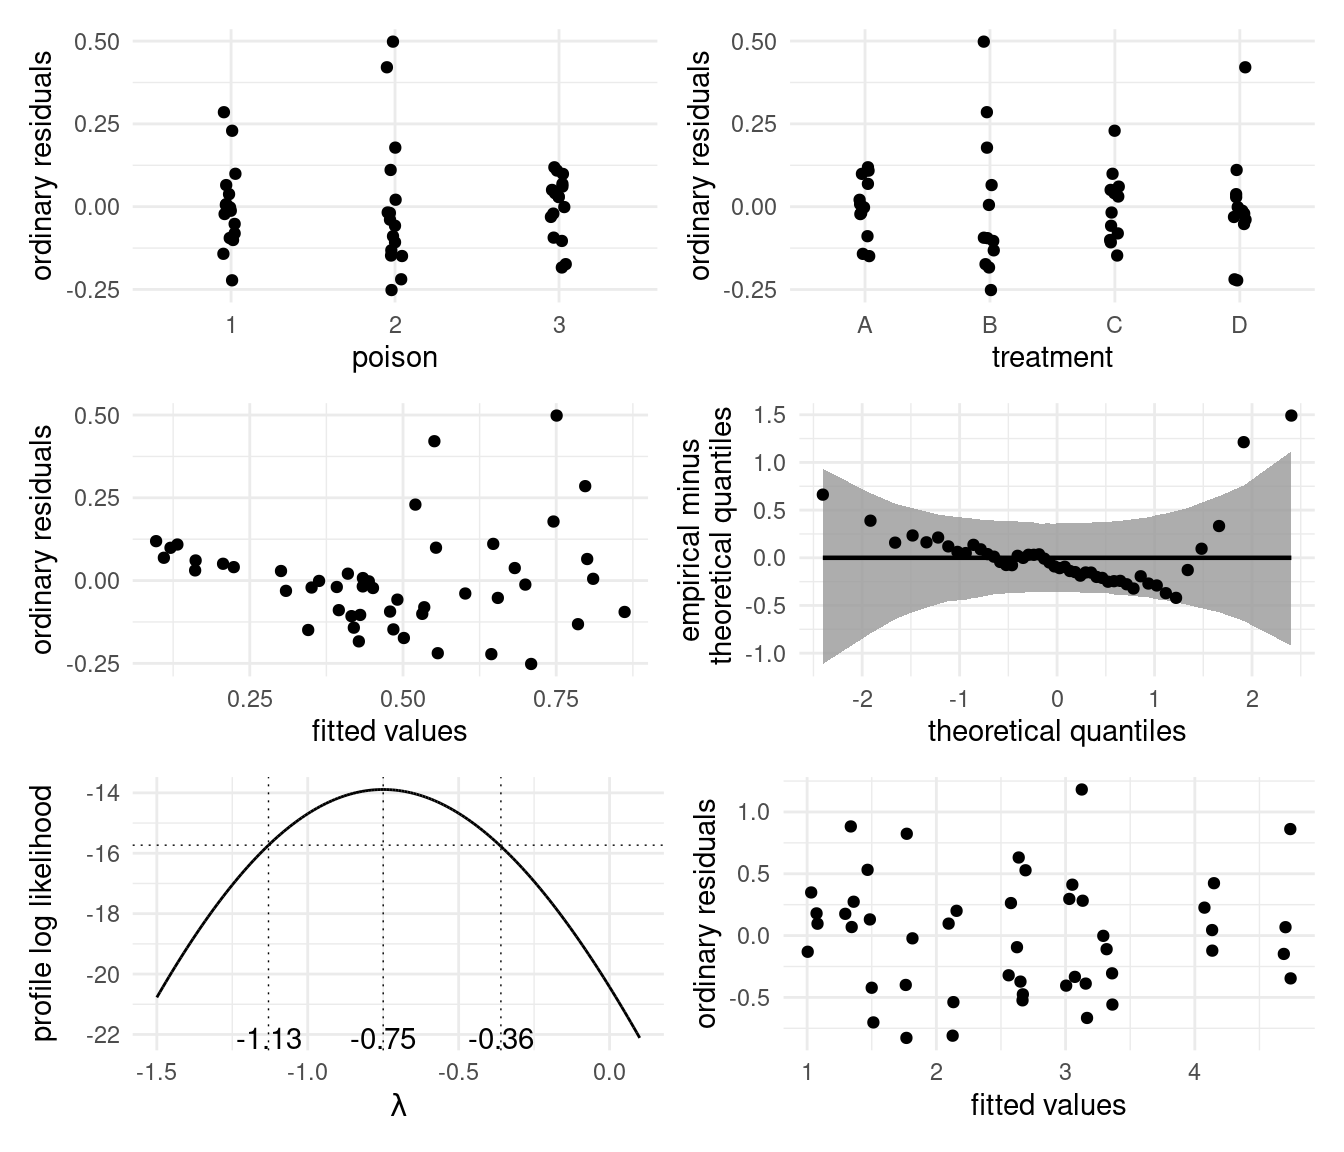 Diagnostic plots for the poison data. The top panel shows the ordinary residuals for the linear model for survival time as a function of poison and treatment, with jittered observations. The middle left plot shows the fitted values against residuals, which display evidence of trend and increase in variance with the survival time. The quantile-quantile plot in the middle right plot shows some evidence of departure from the normality, but the non-linearity and heteroscedasticity obscure this. The bottom panel shows the profile log likelihood for the Box--Cox transform, suggesting a value of $-1$ would be within the 95\% confidence interval. After fitting the same additive model with main effect only to the reciprocal survival time, there is no more evidence of residual structure and unequal variance.